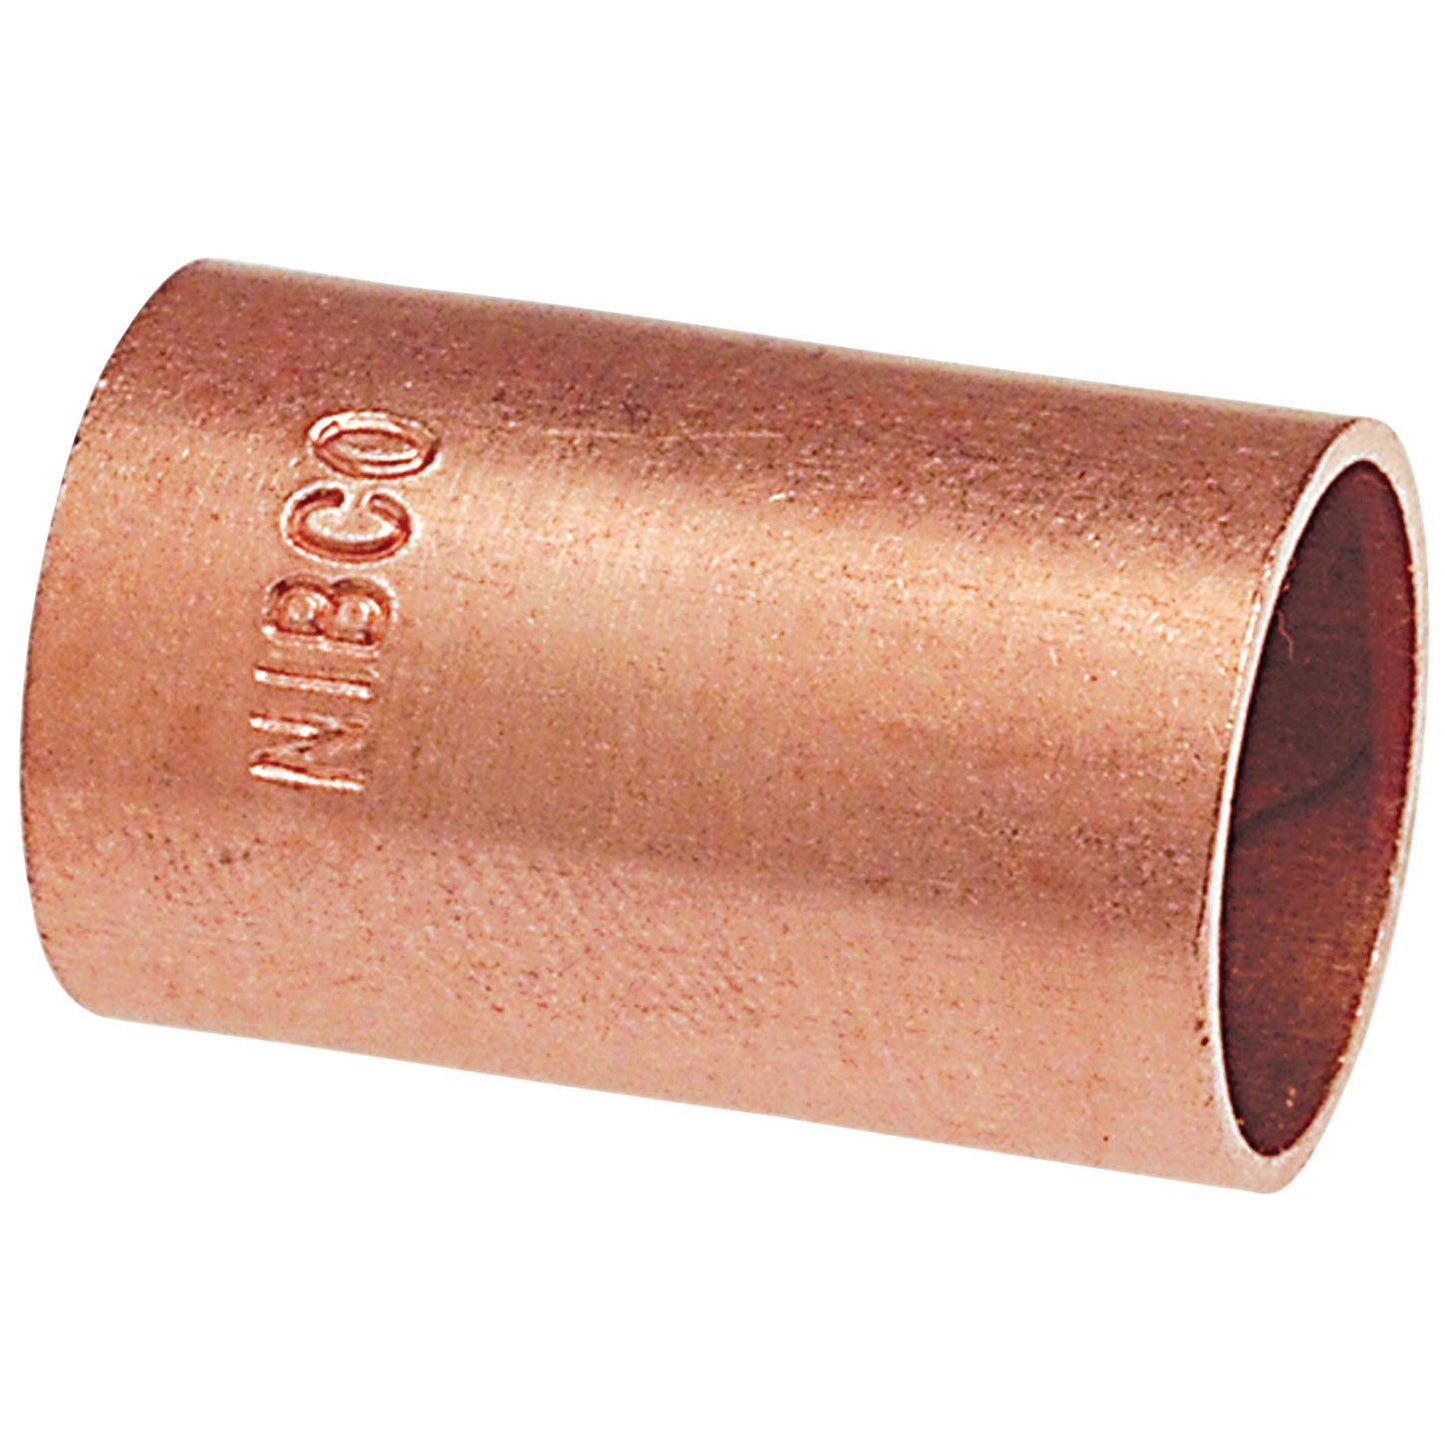 1/2" Coupling without Stop C x C - Wrot Copper, 601